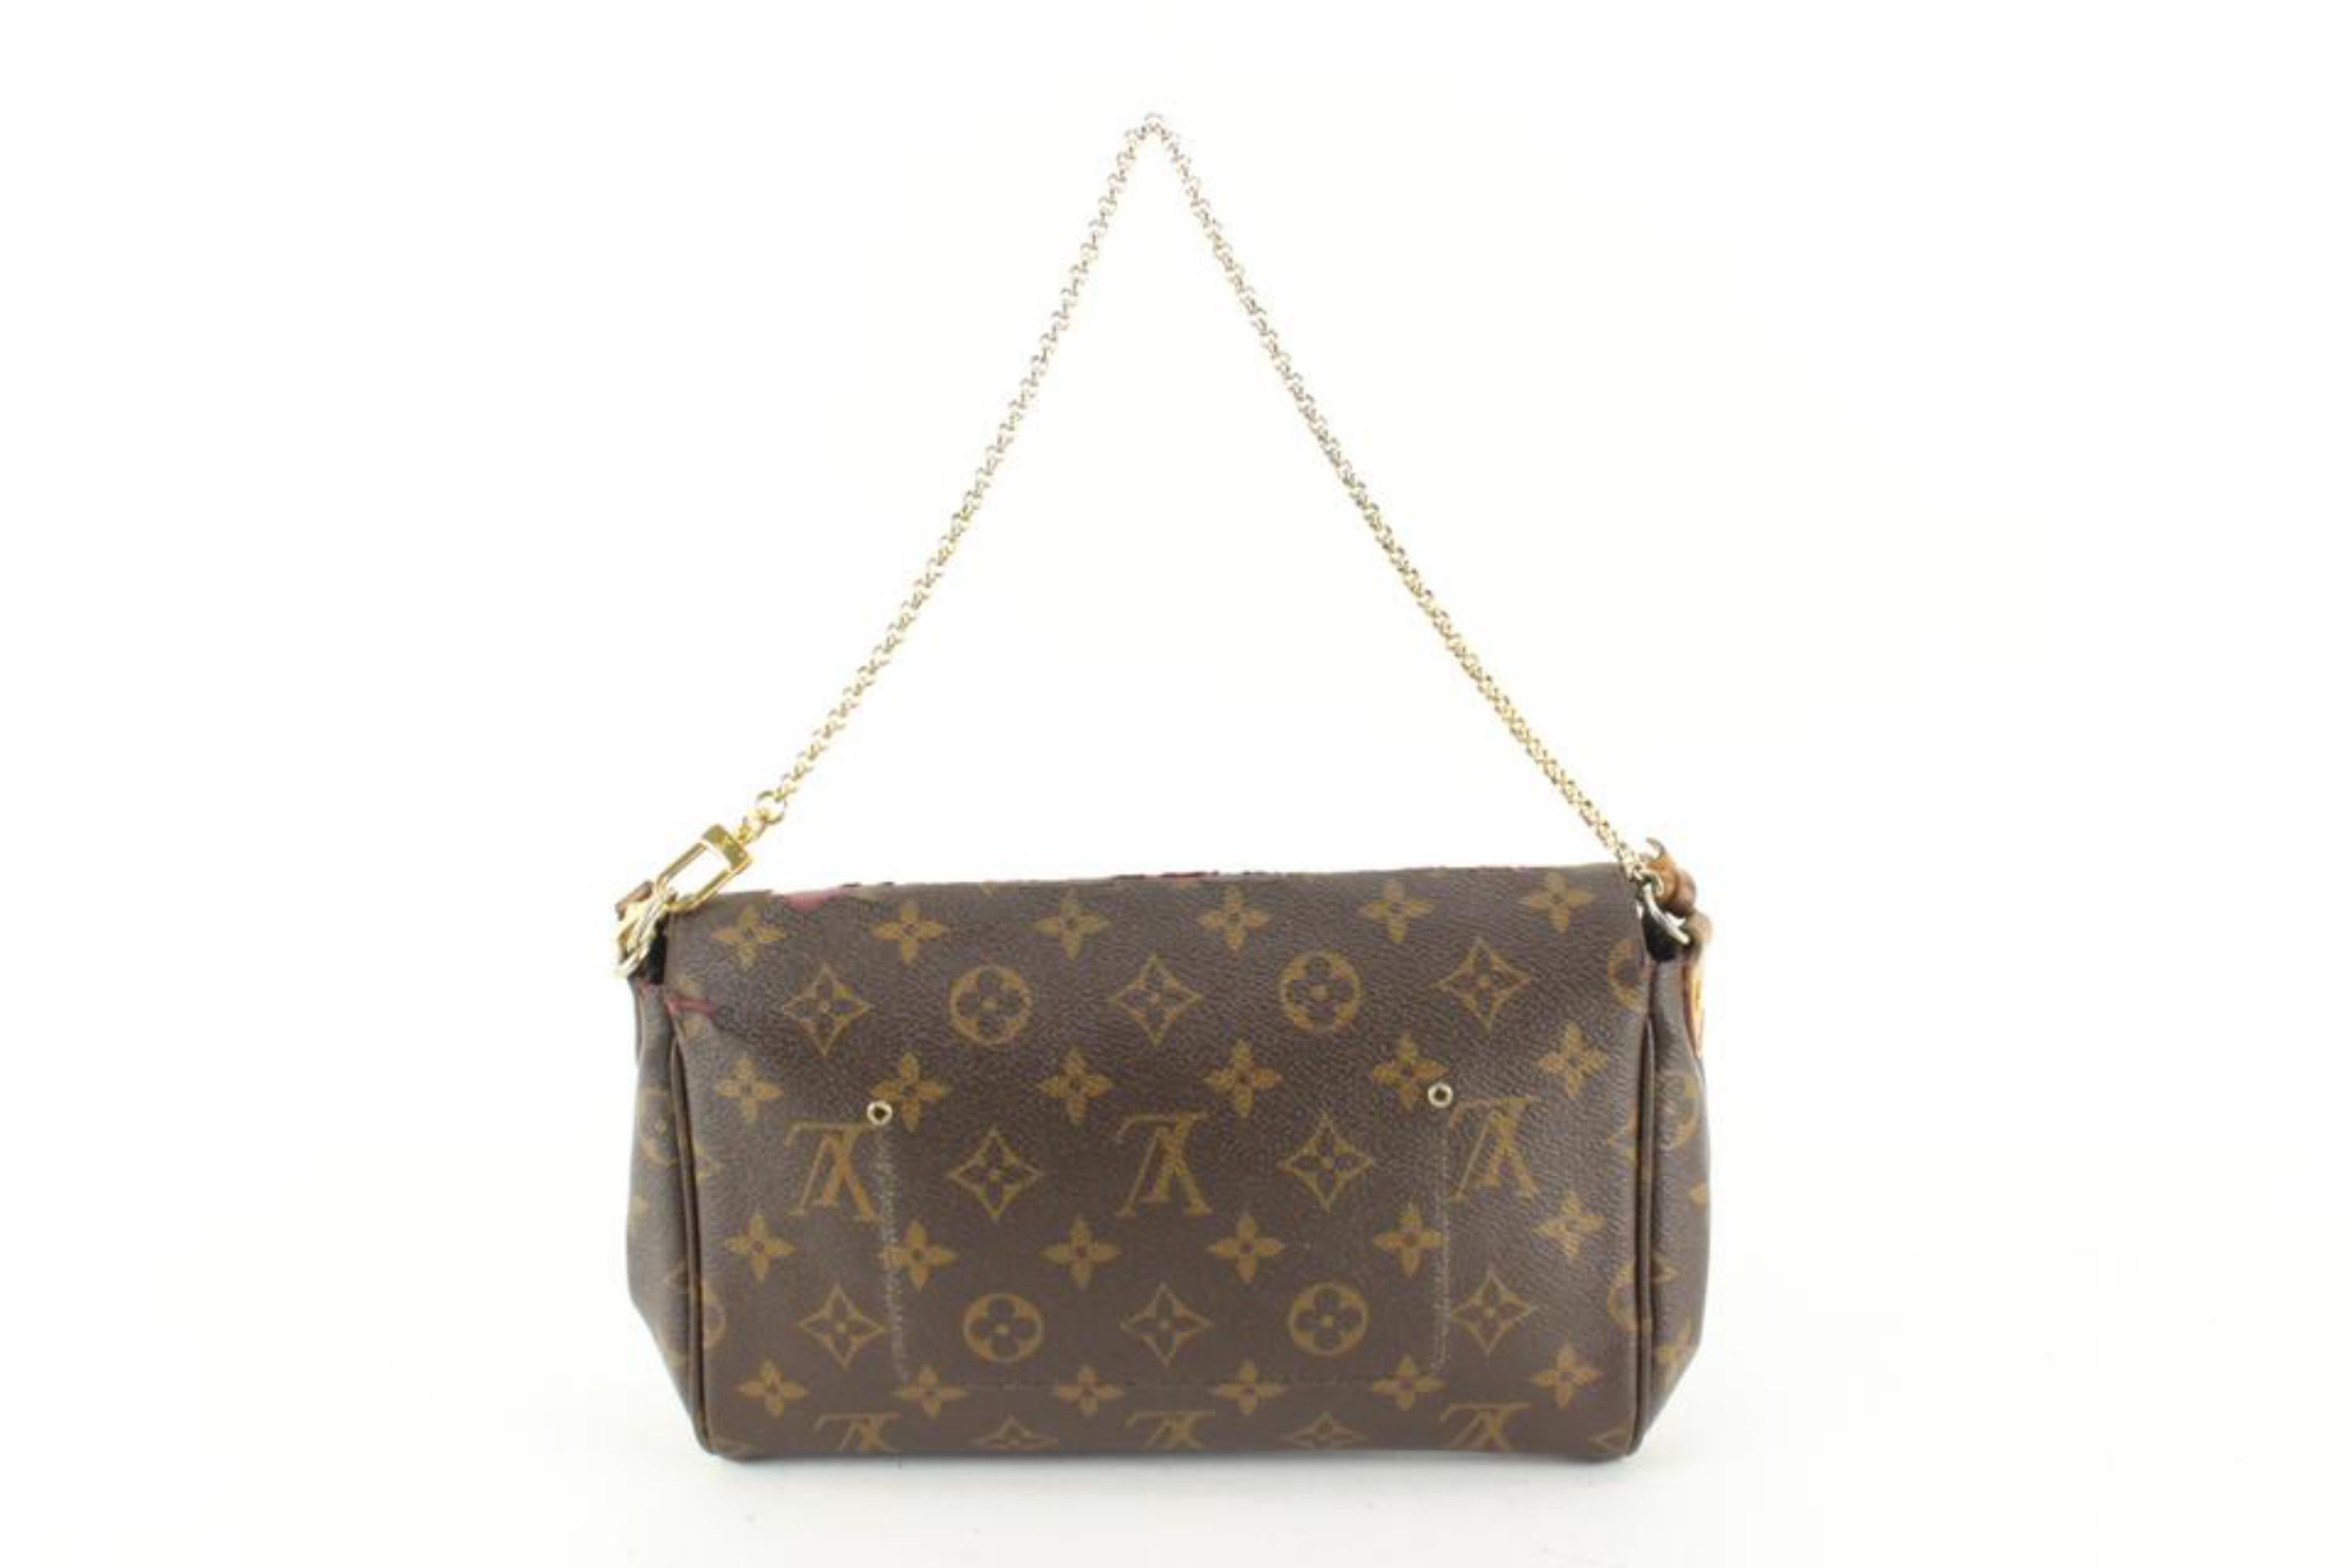 Louis Vuitton Monogram Favorite MM 2way Crossbody Flap Bag 4lk53s In Fair Condition For Sale In Dix hills, NY